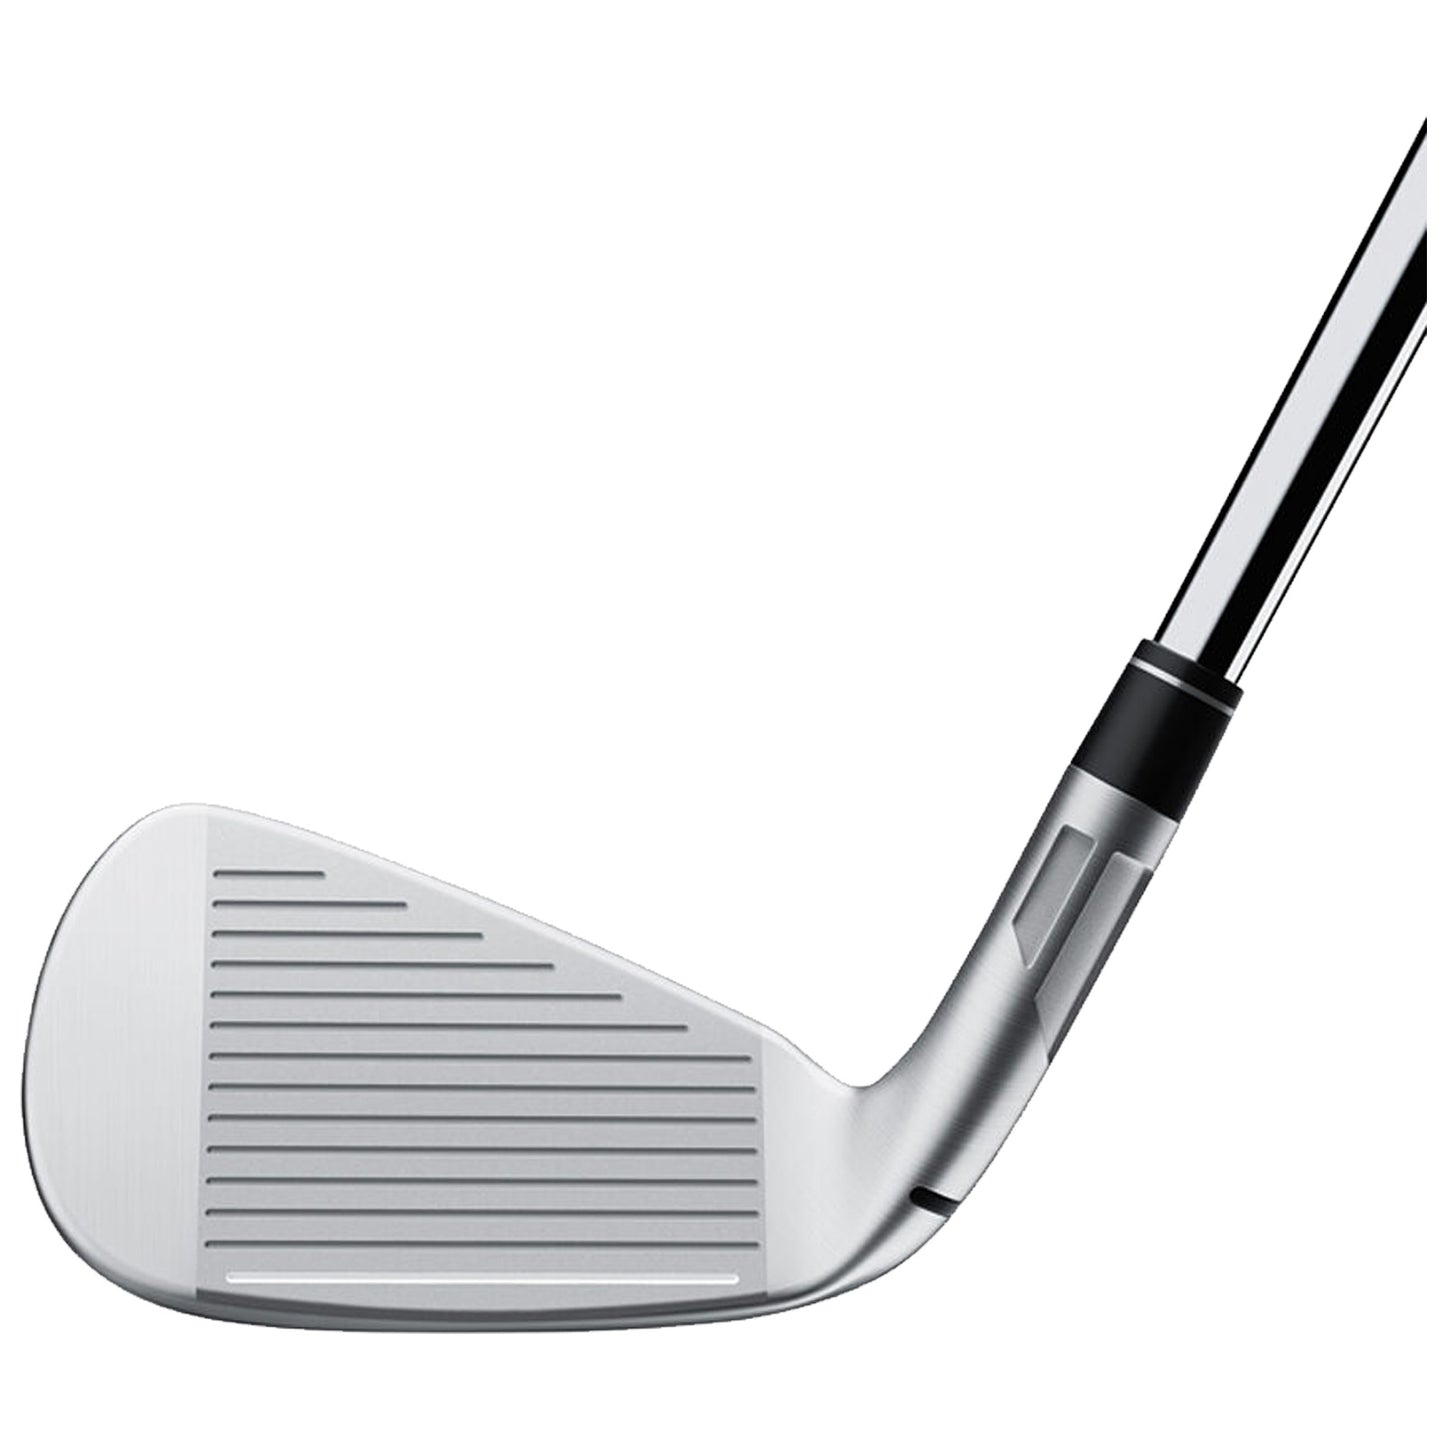 Left Handed TaylorMade Mens Stealth Approach Wedge